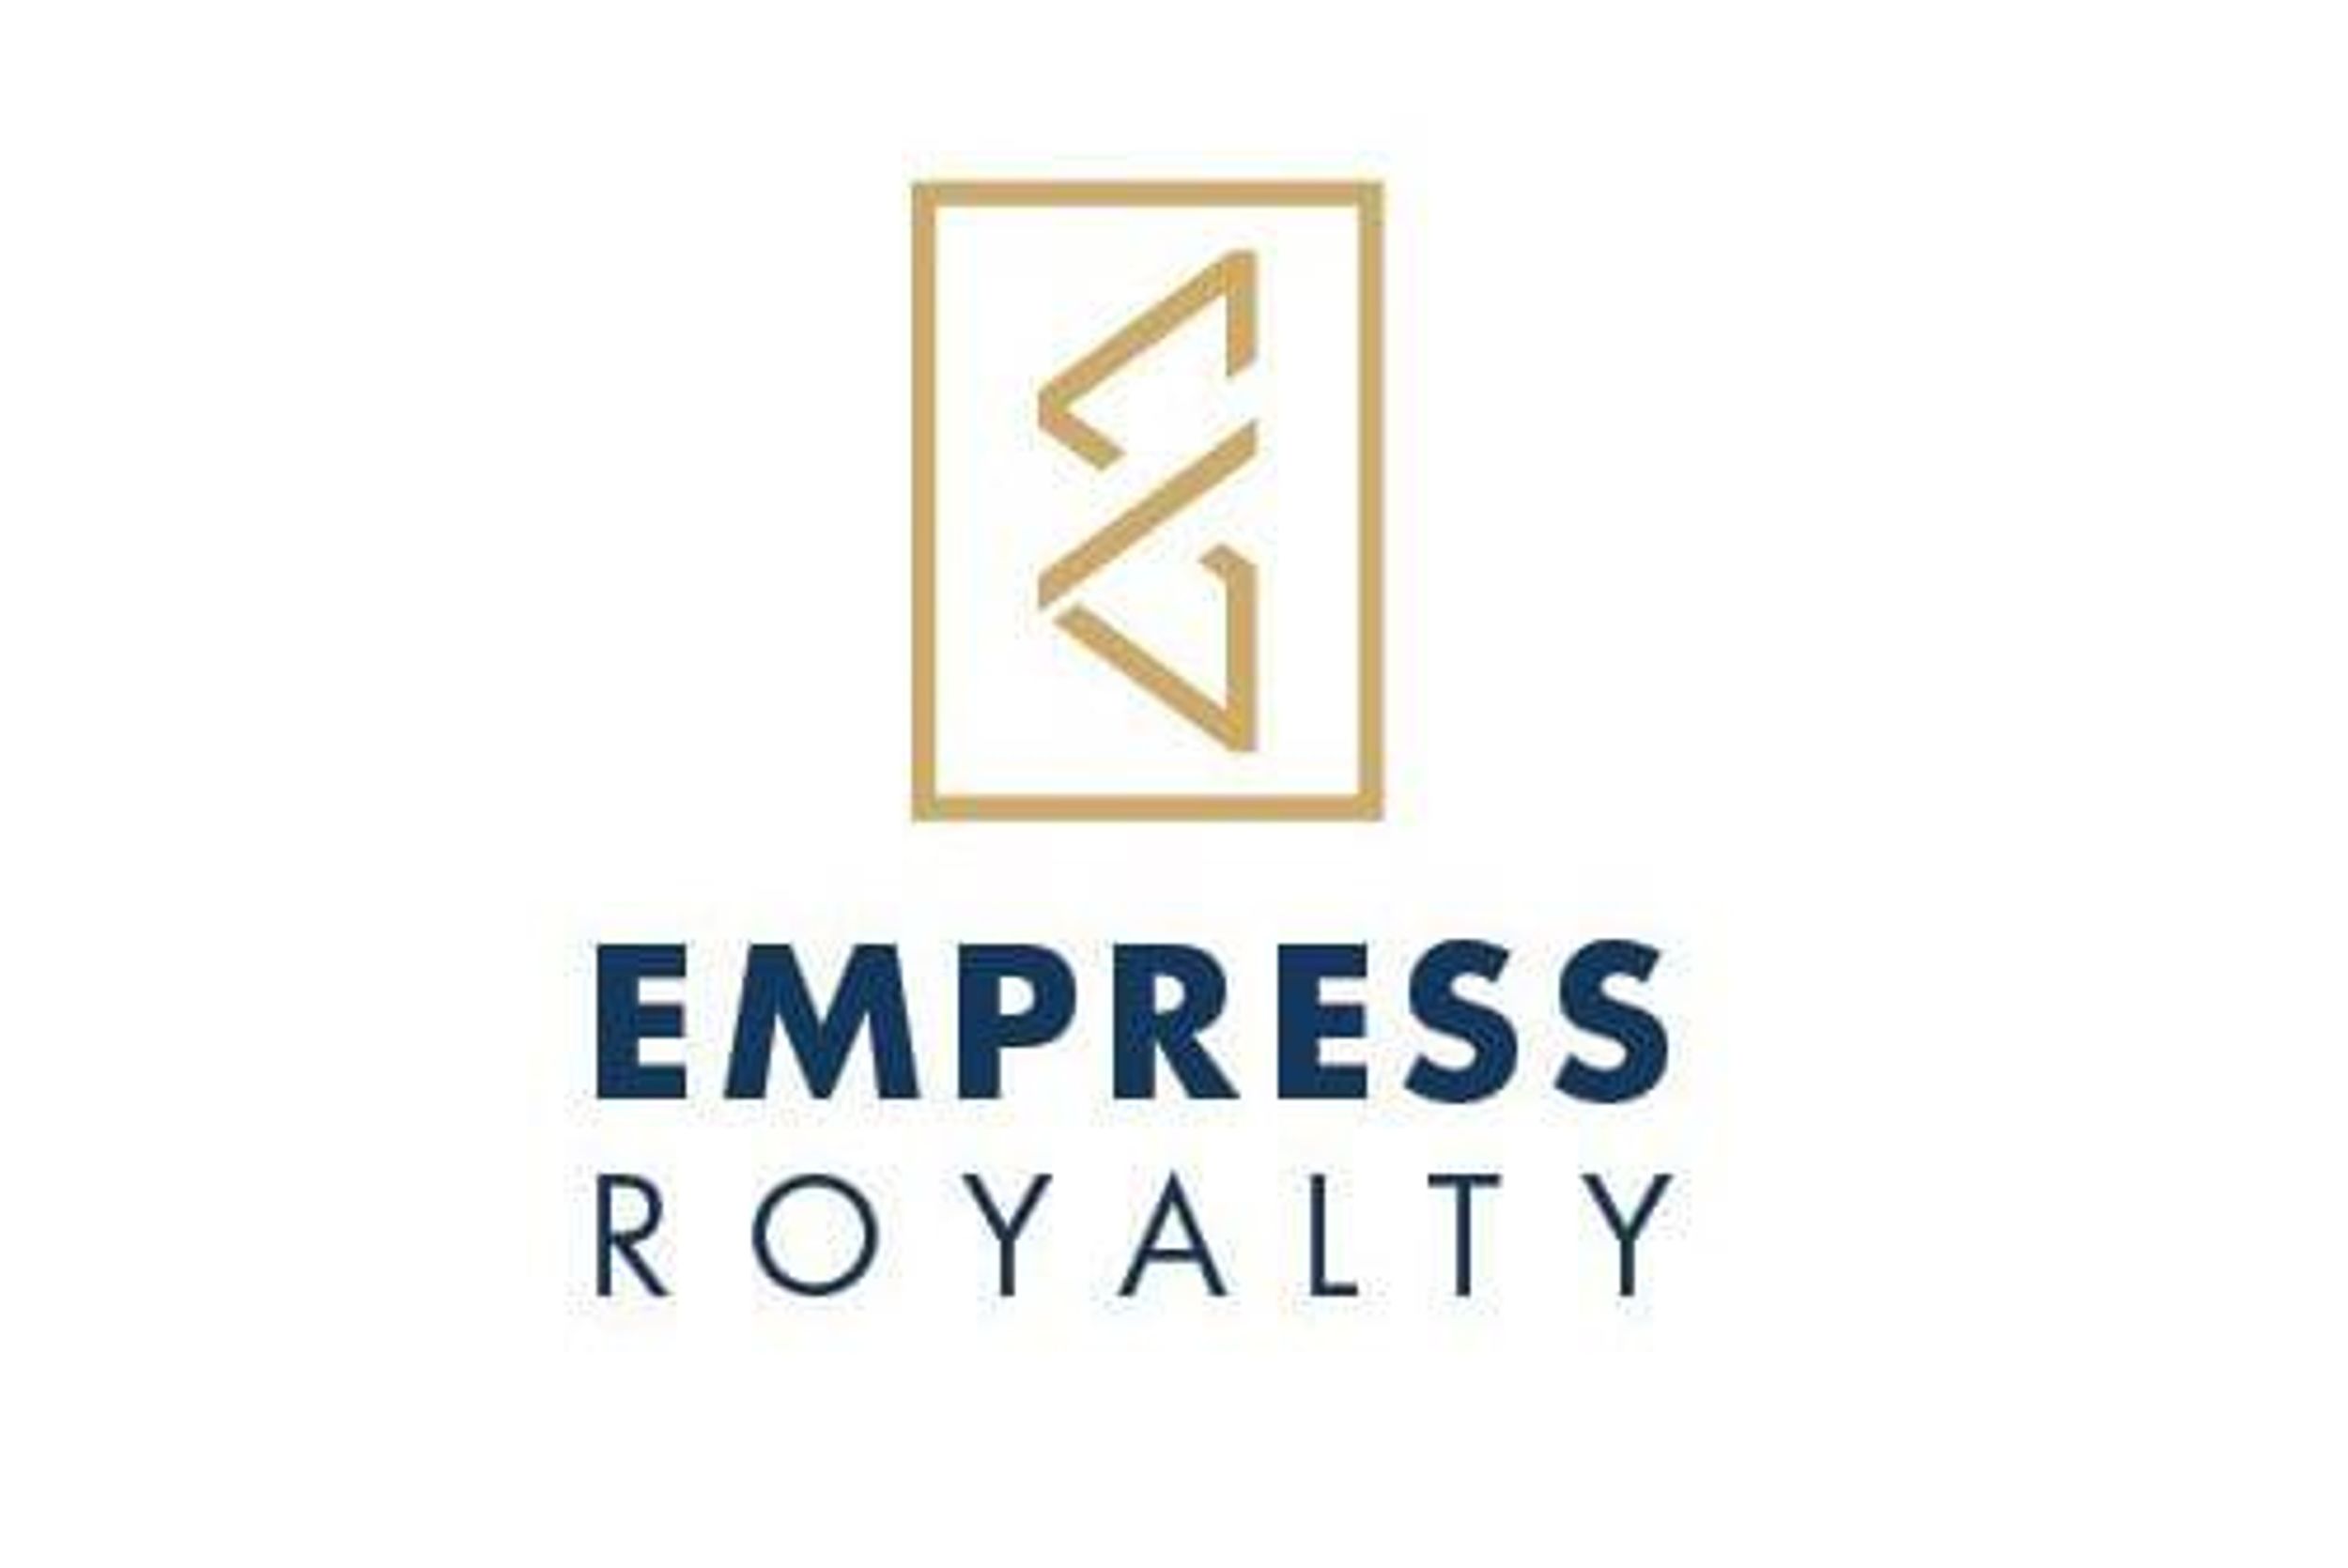 Empress Royalty Increases Gold Royalty On Manica Project